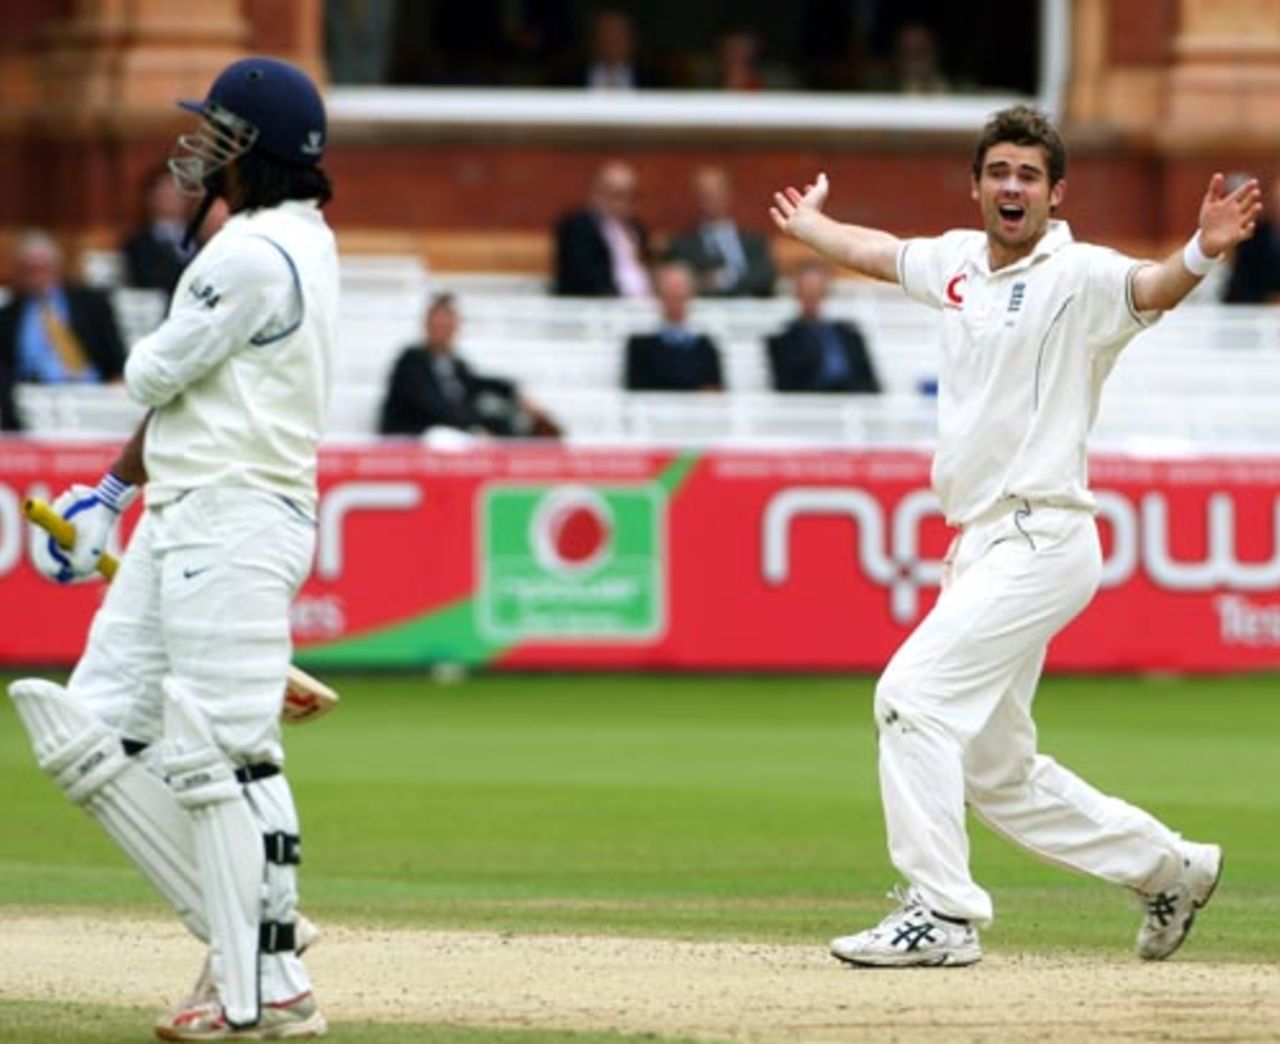 James Anderson looks toward Mahendra Singh Dhoni after his appeal for caught behind was turned down, England v India, 1st Test, Lord's, 5th day, July 23, 2007 